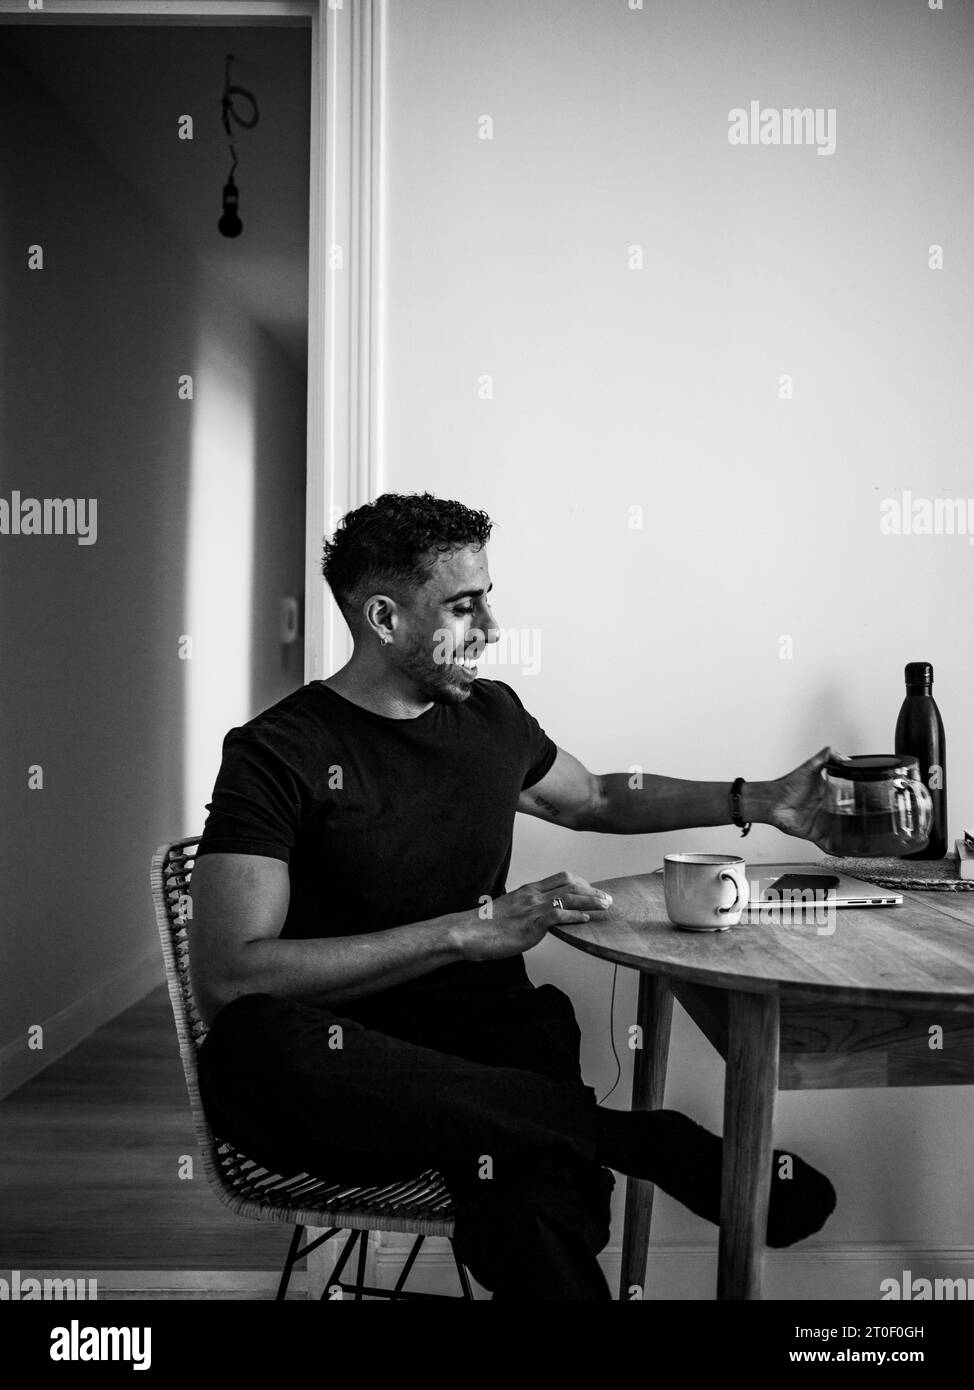 Non-binary person with black t-shirt sits at kitchen table Stock Photo